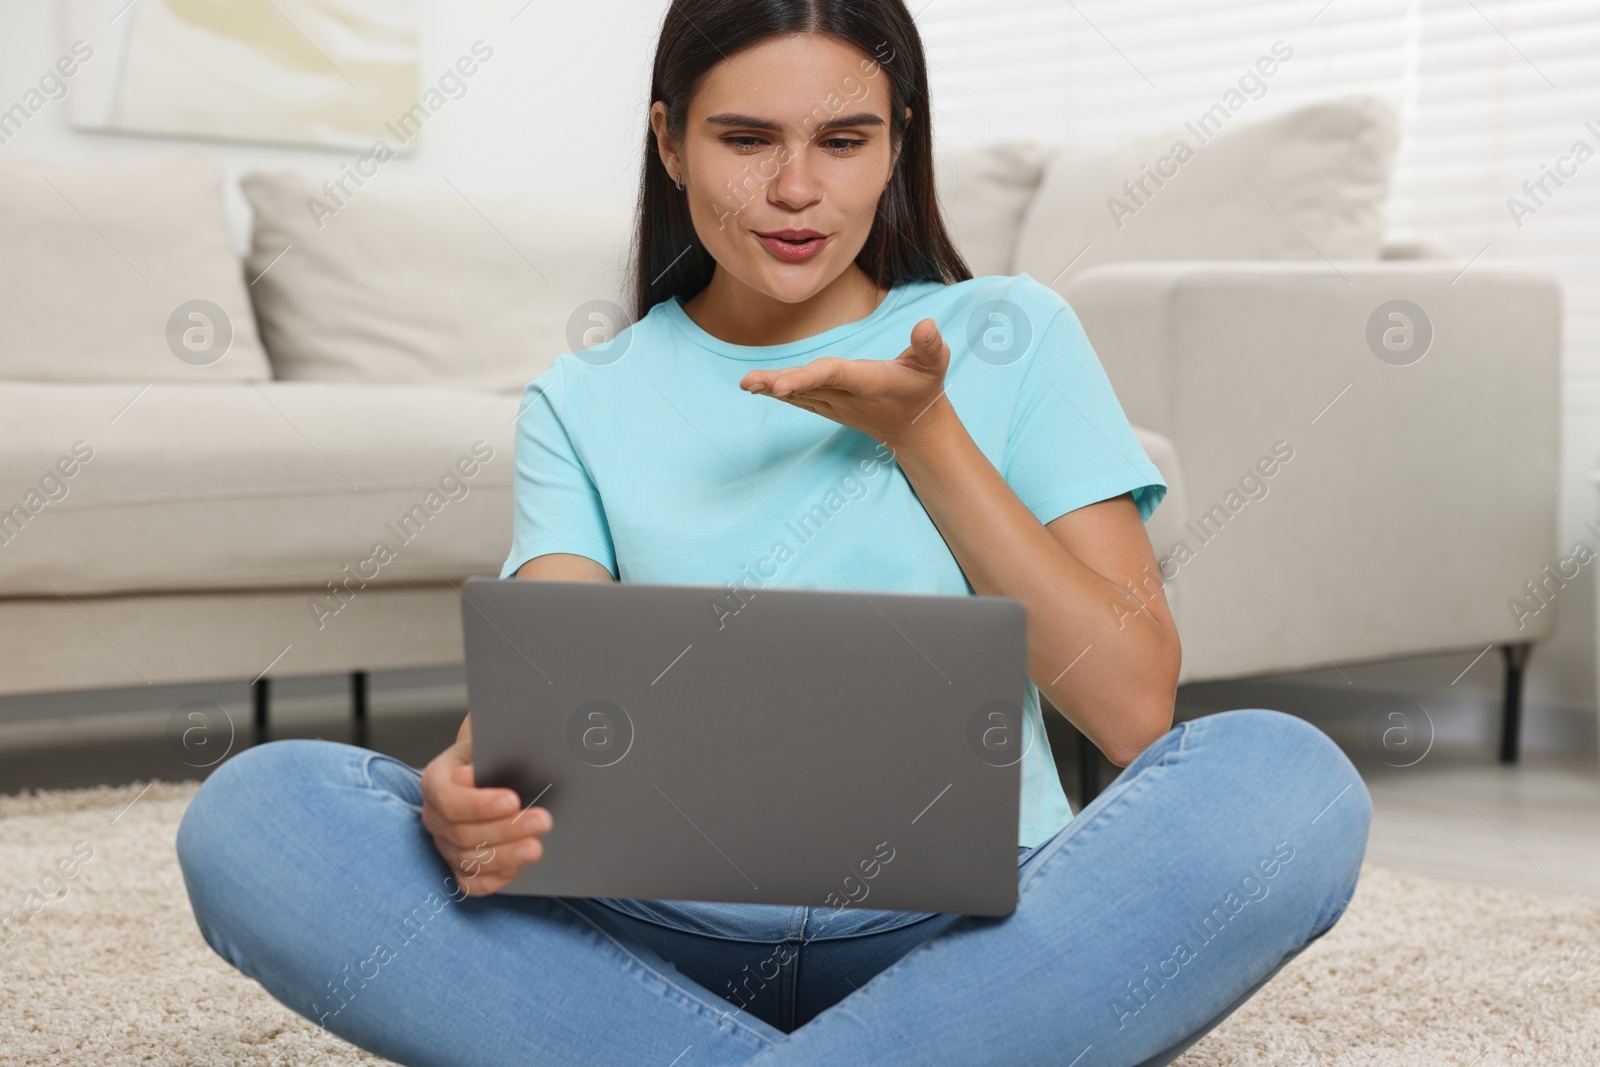 Photo of Young woman having video chat via laptop and blowing kiss on floor at home